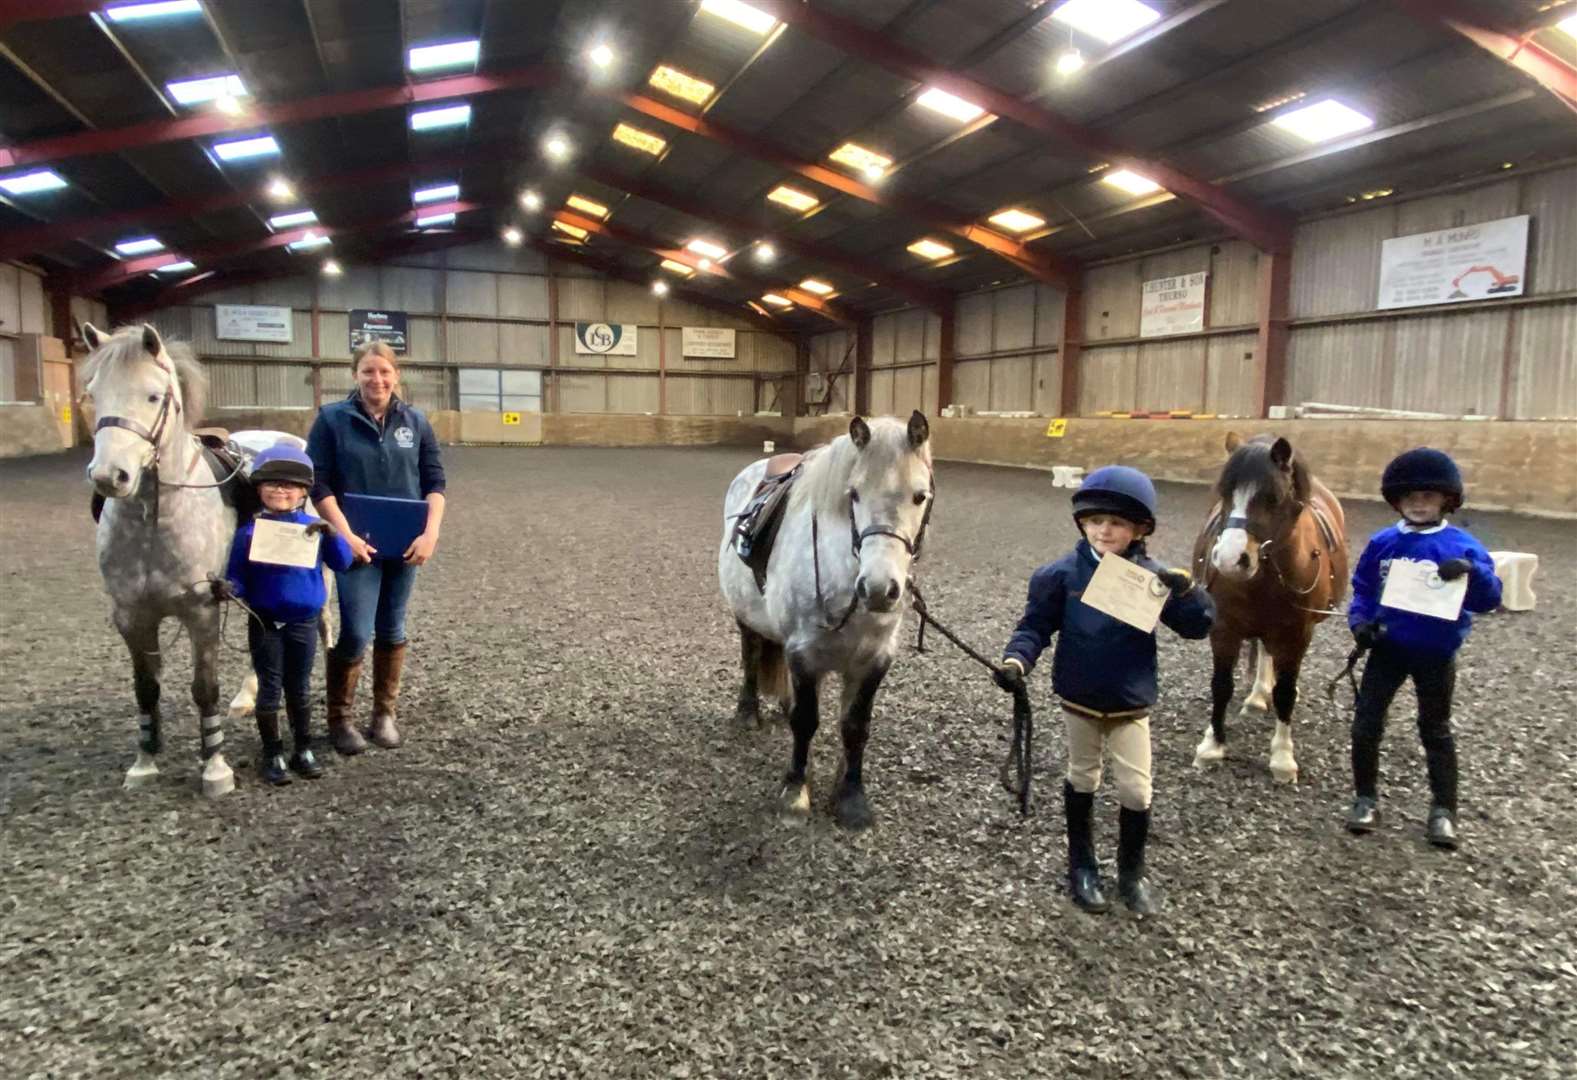 Ashleigh Campbell from Castle View Stables with Lois Manson, Magnus Southall and Blaire Patterson during Saturday's event in Halkirk.